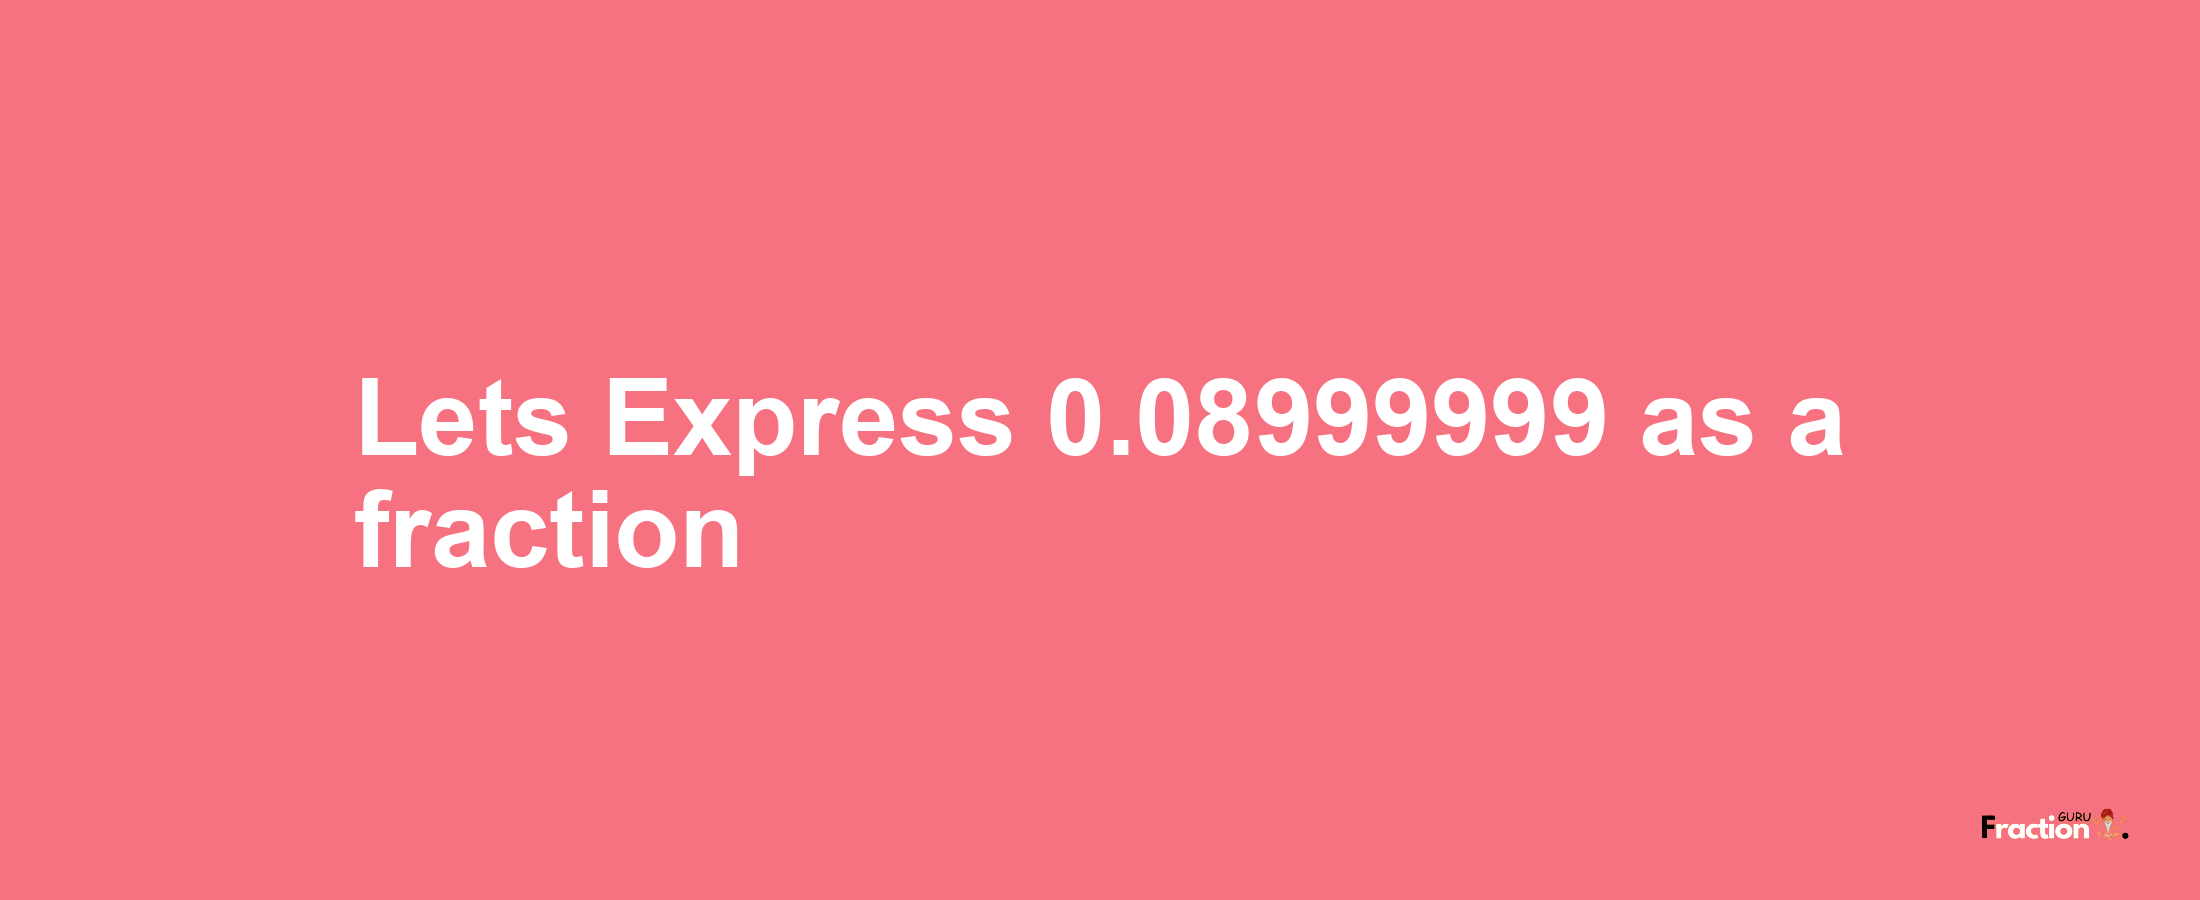 Lets Express 0.08999999 as afraction